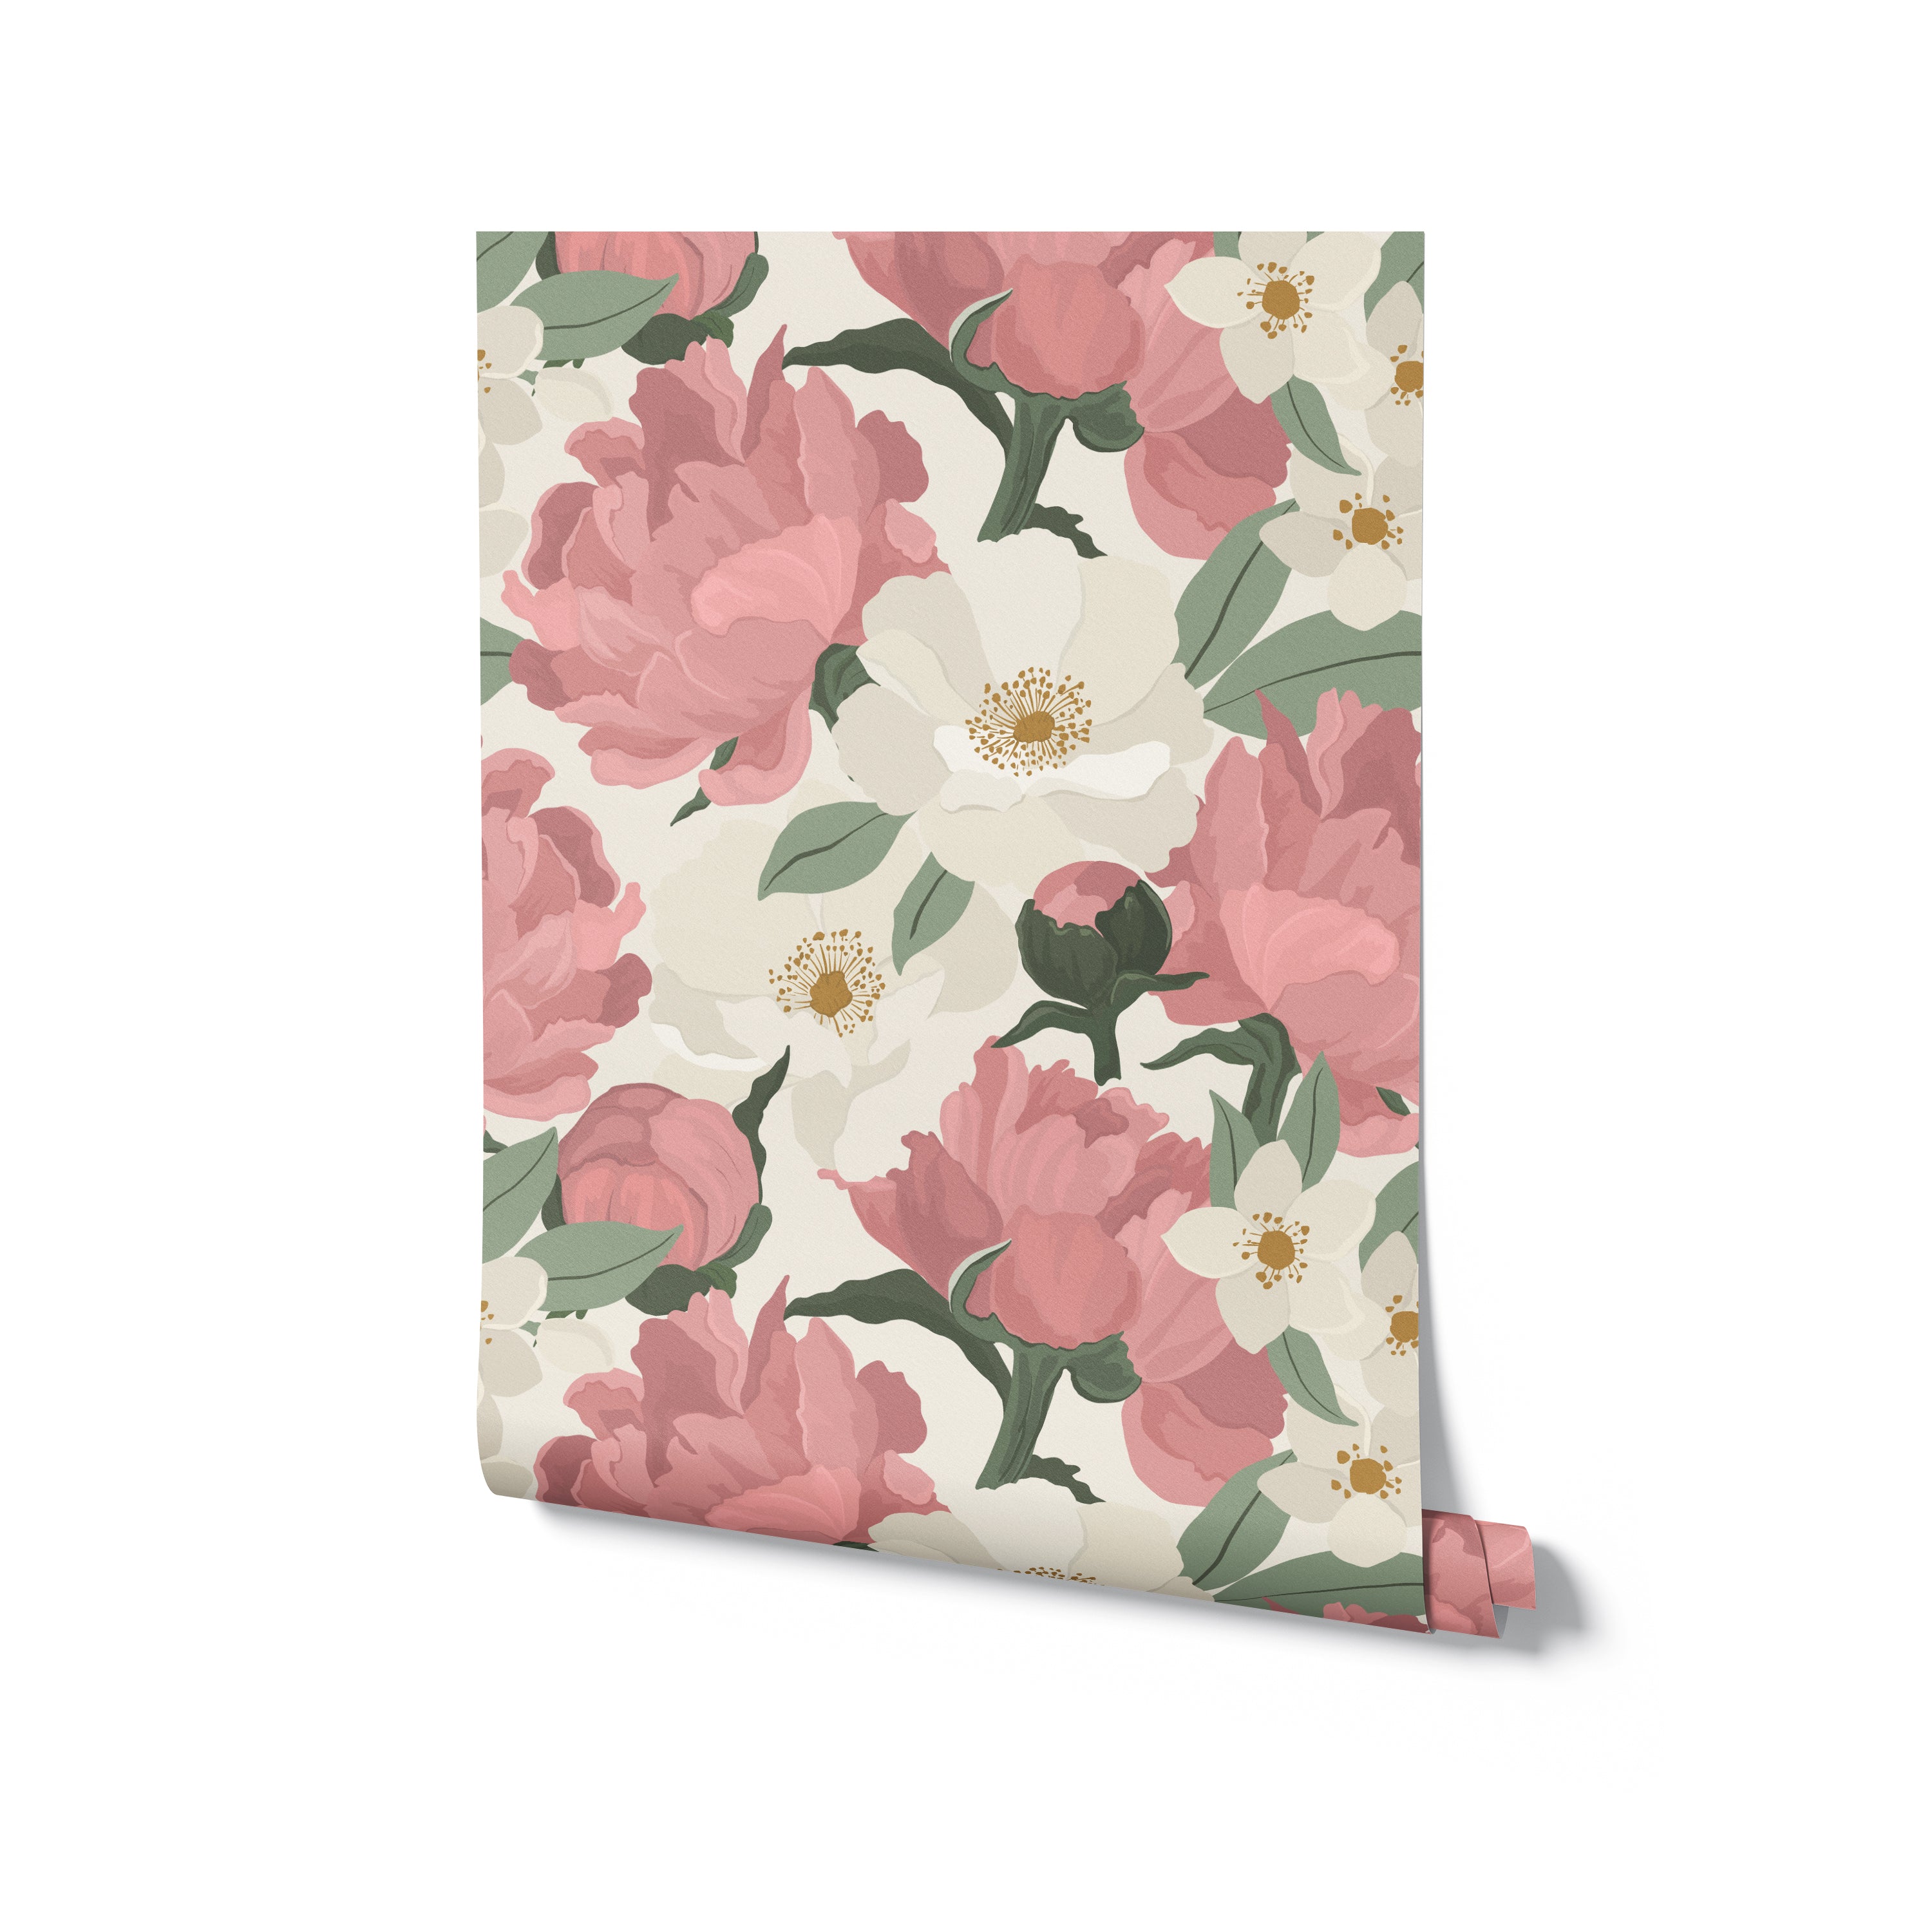 A roll of Maggie Floral Wallpaper, showcasing its continuous pattern of large pink peonies and smaller white flowers. The wallpaper features a soft color palette, blending seamlessly into any decor while adding a touch of nature's beauty.